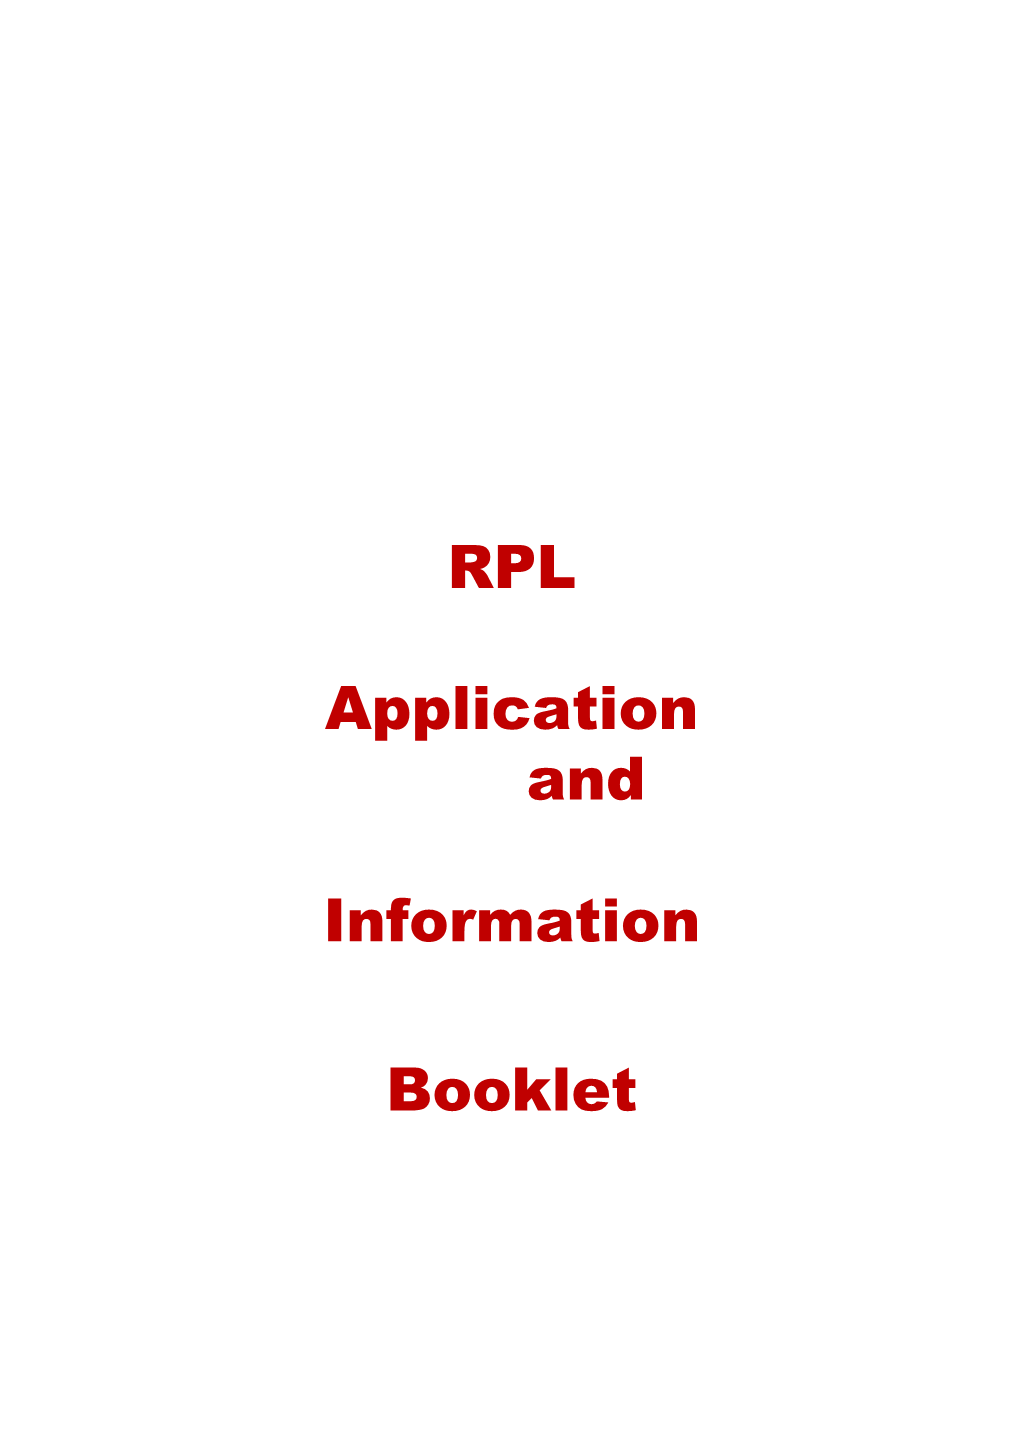 RPL Application And